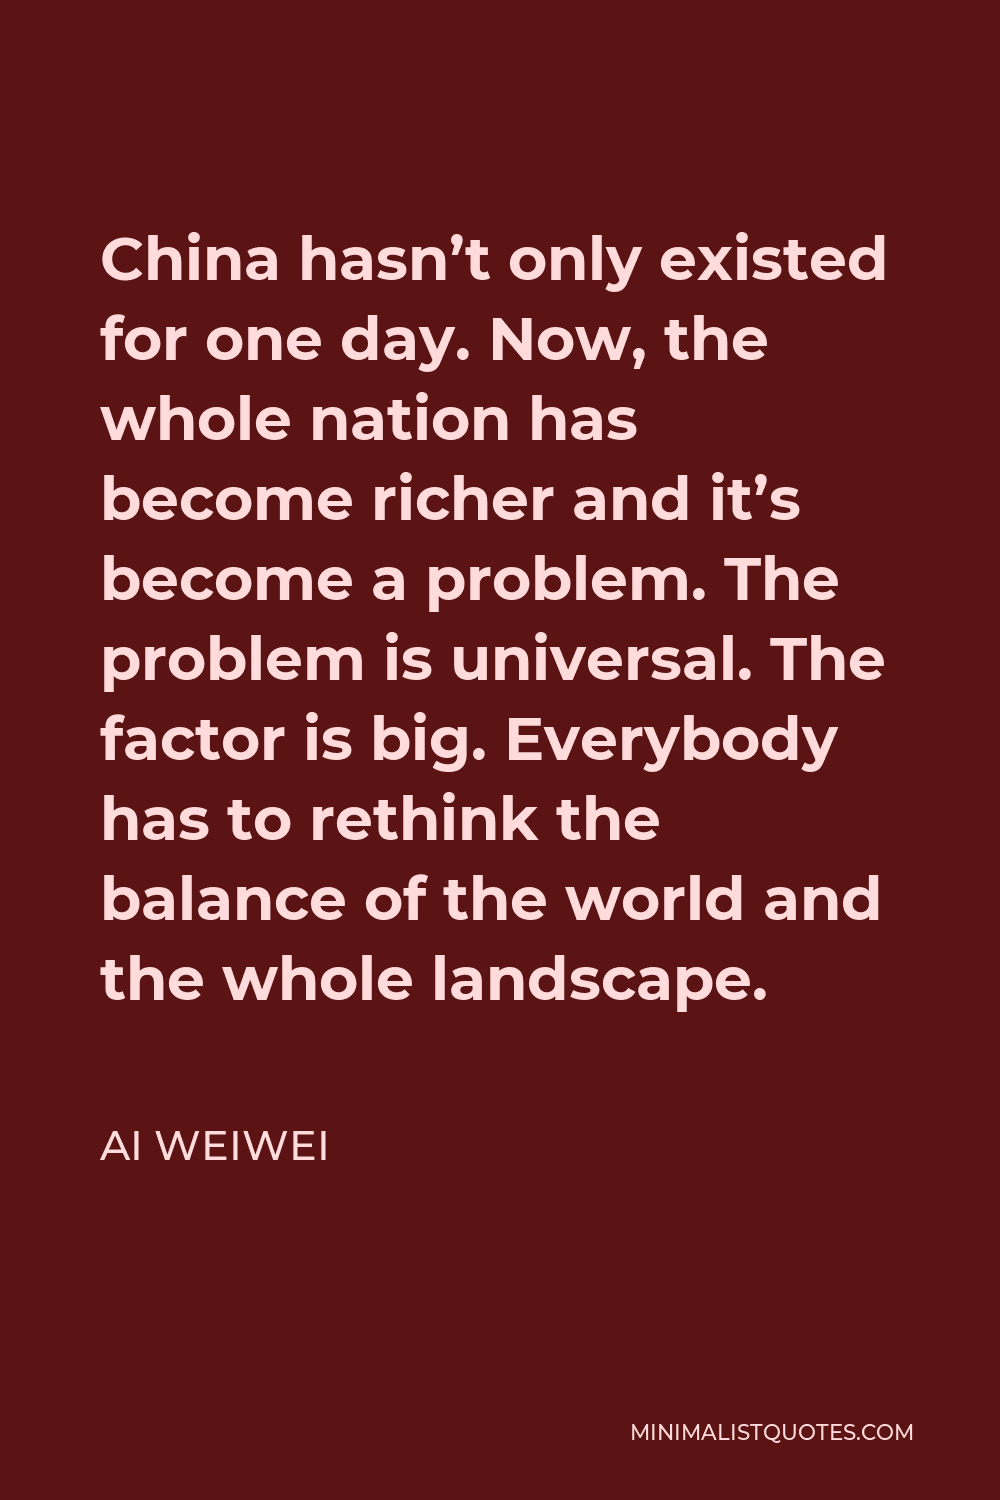 Ai Weiwei Quote - China hasn’t only existed for one day. Now, the whole nation has become richer and it’s become a problem. The problem is universal. The factor is big. Everybody has to rethink the balance of the world and the whole landscape.